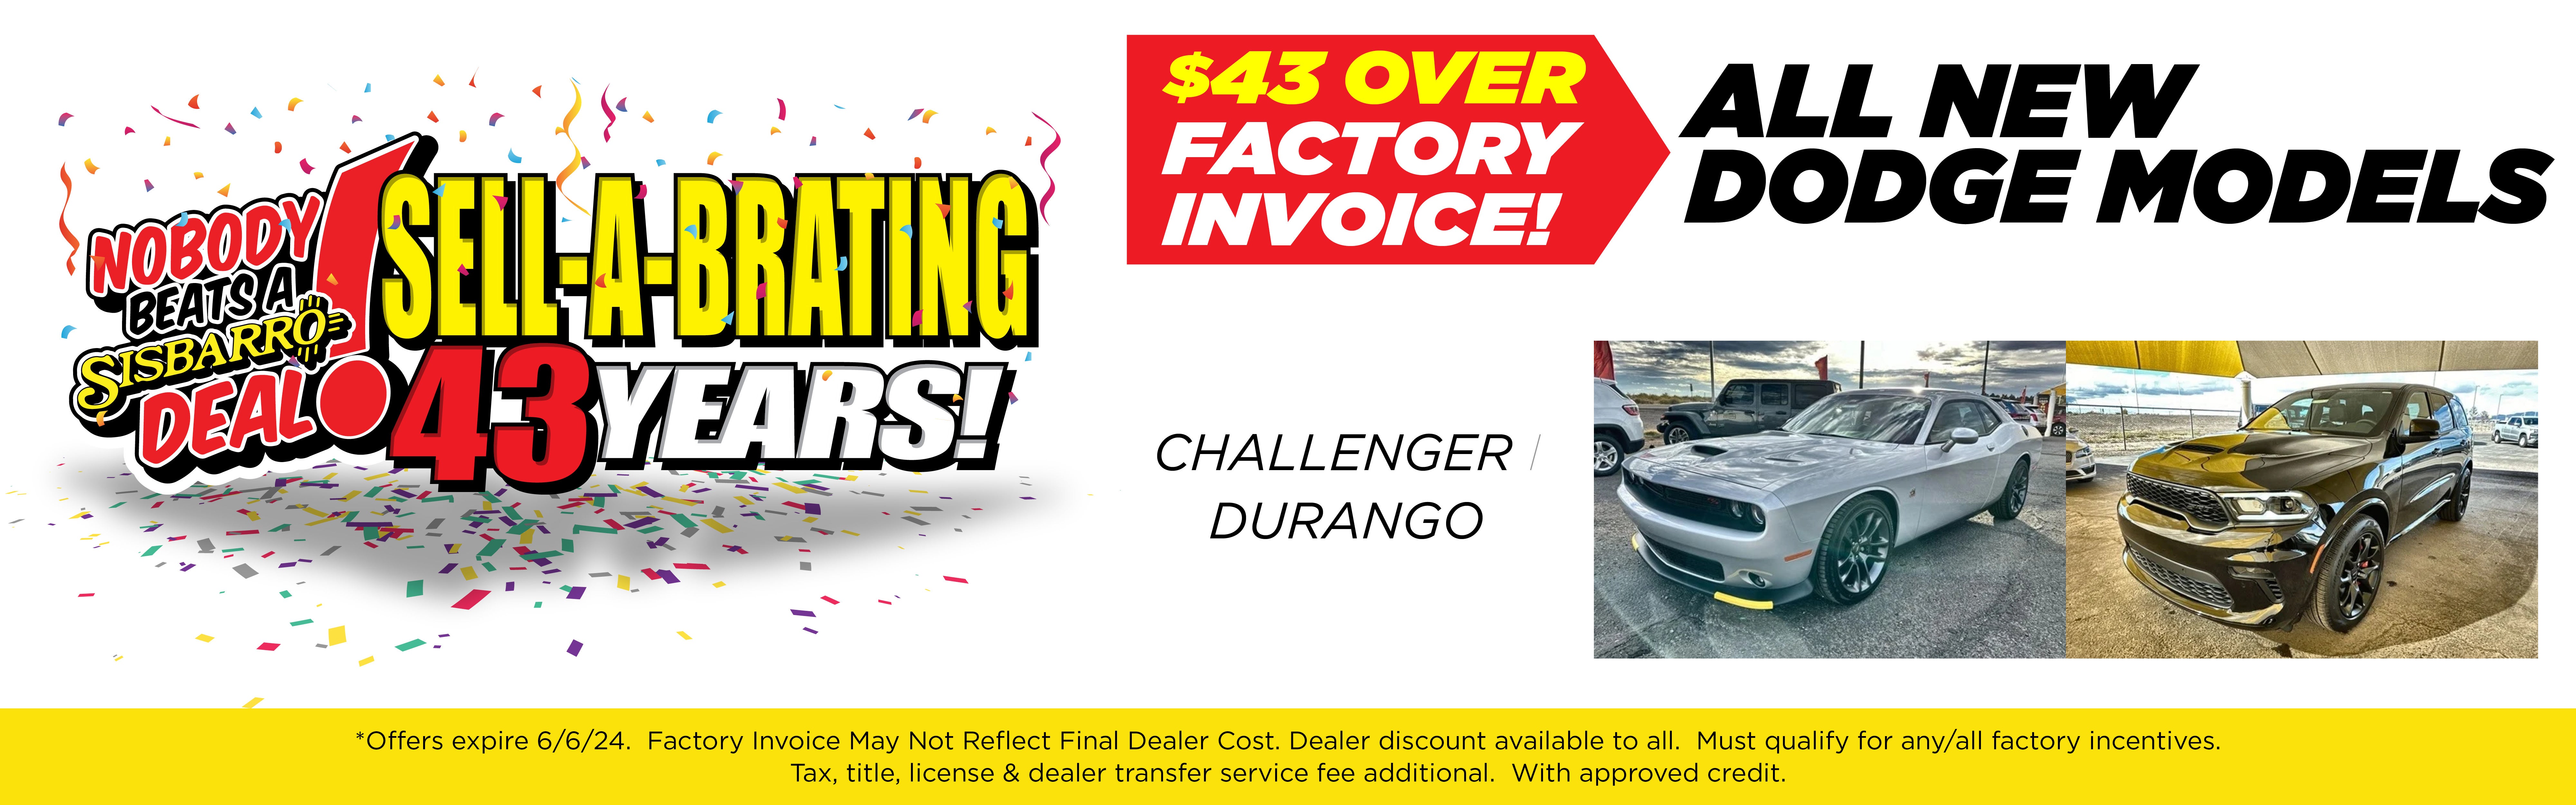 All New Dodge Models $43 Over Factory Invoice